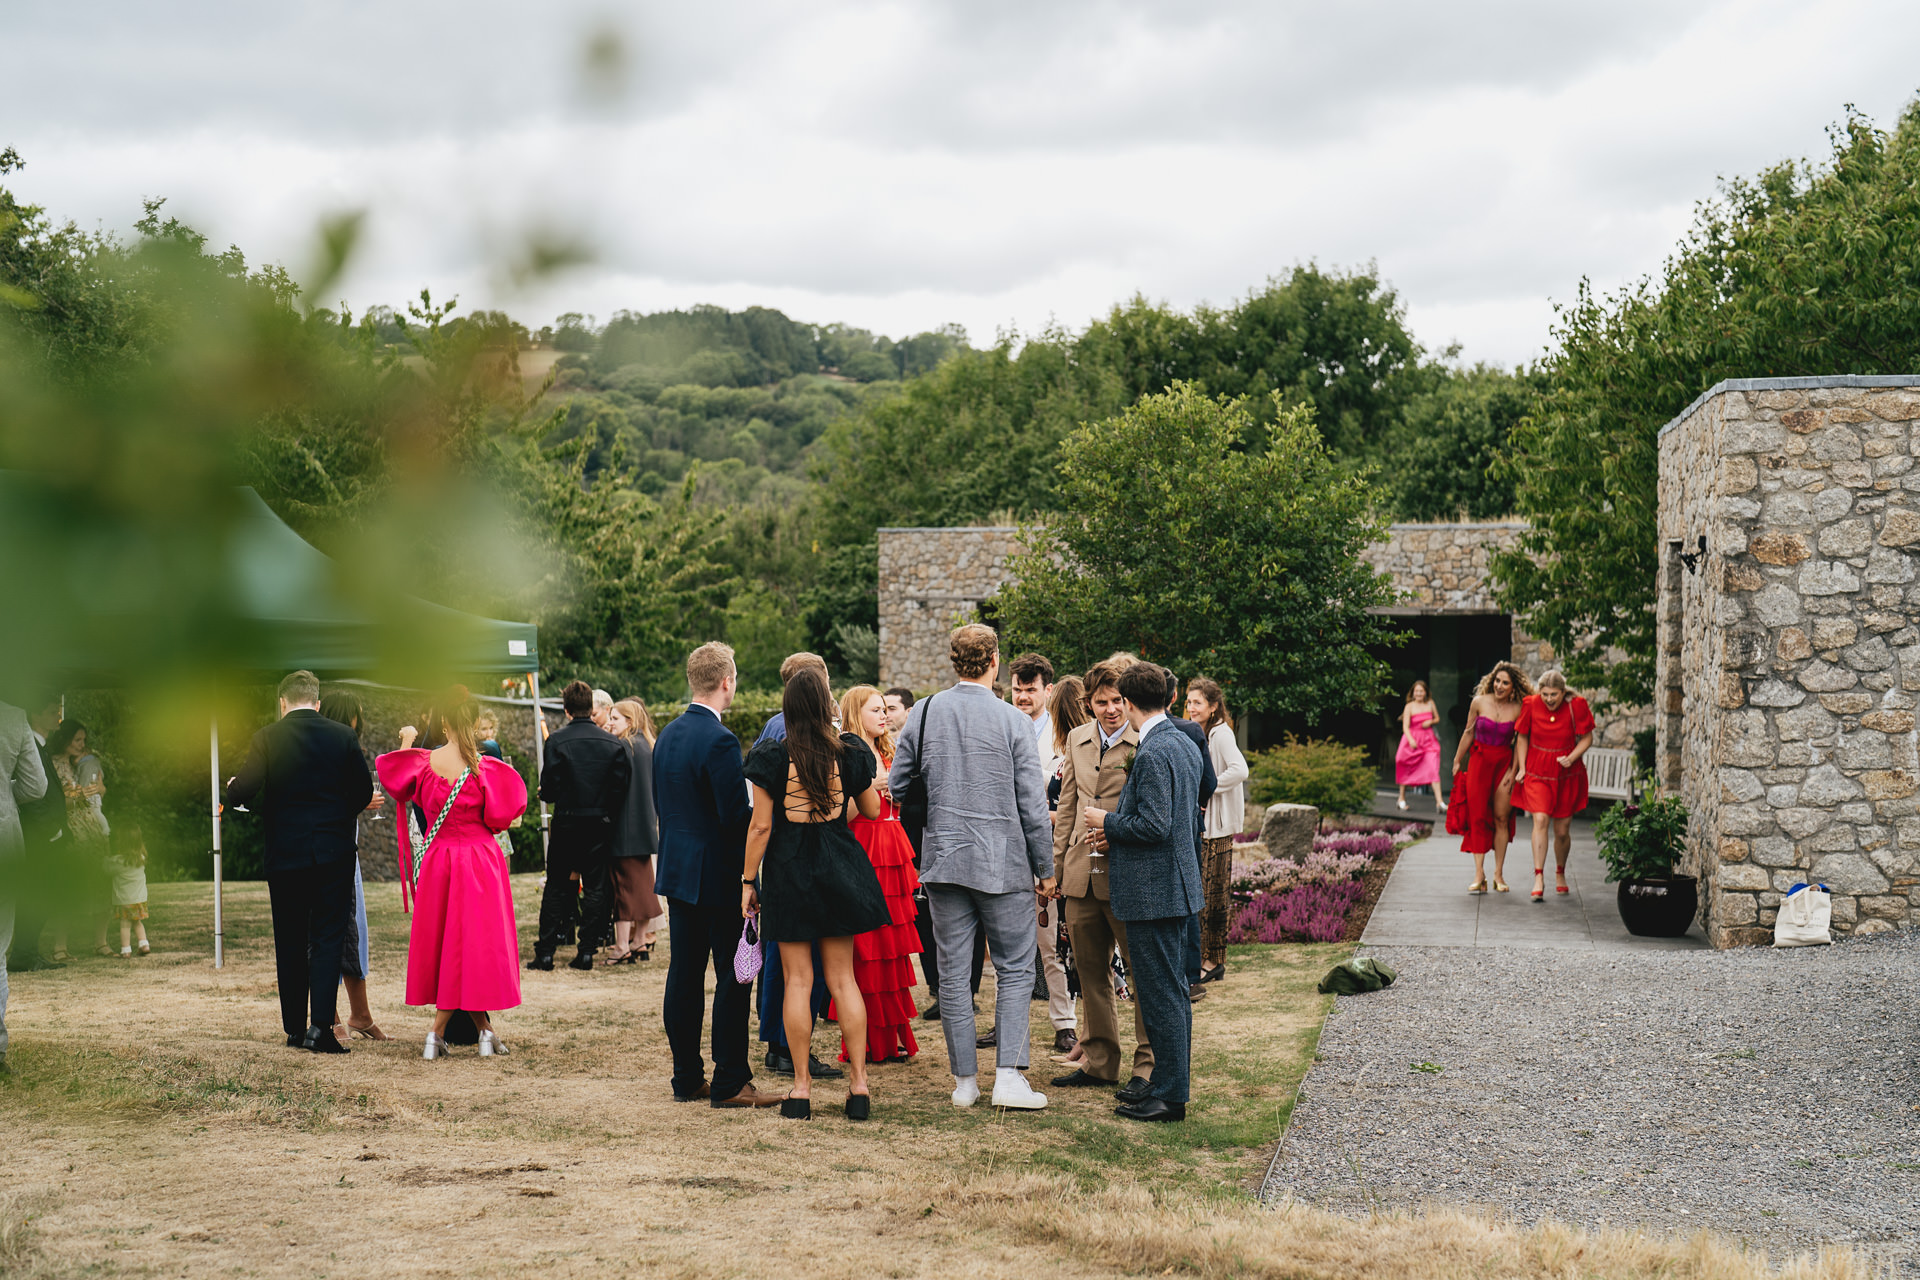 Wedding guests at a drinks reception outside a stylish house with Dartmoor views behind